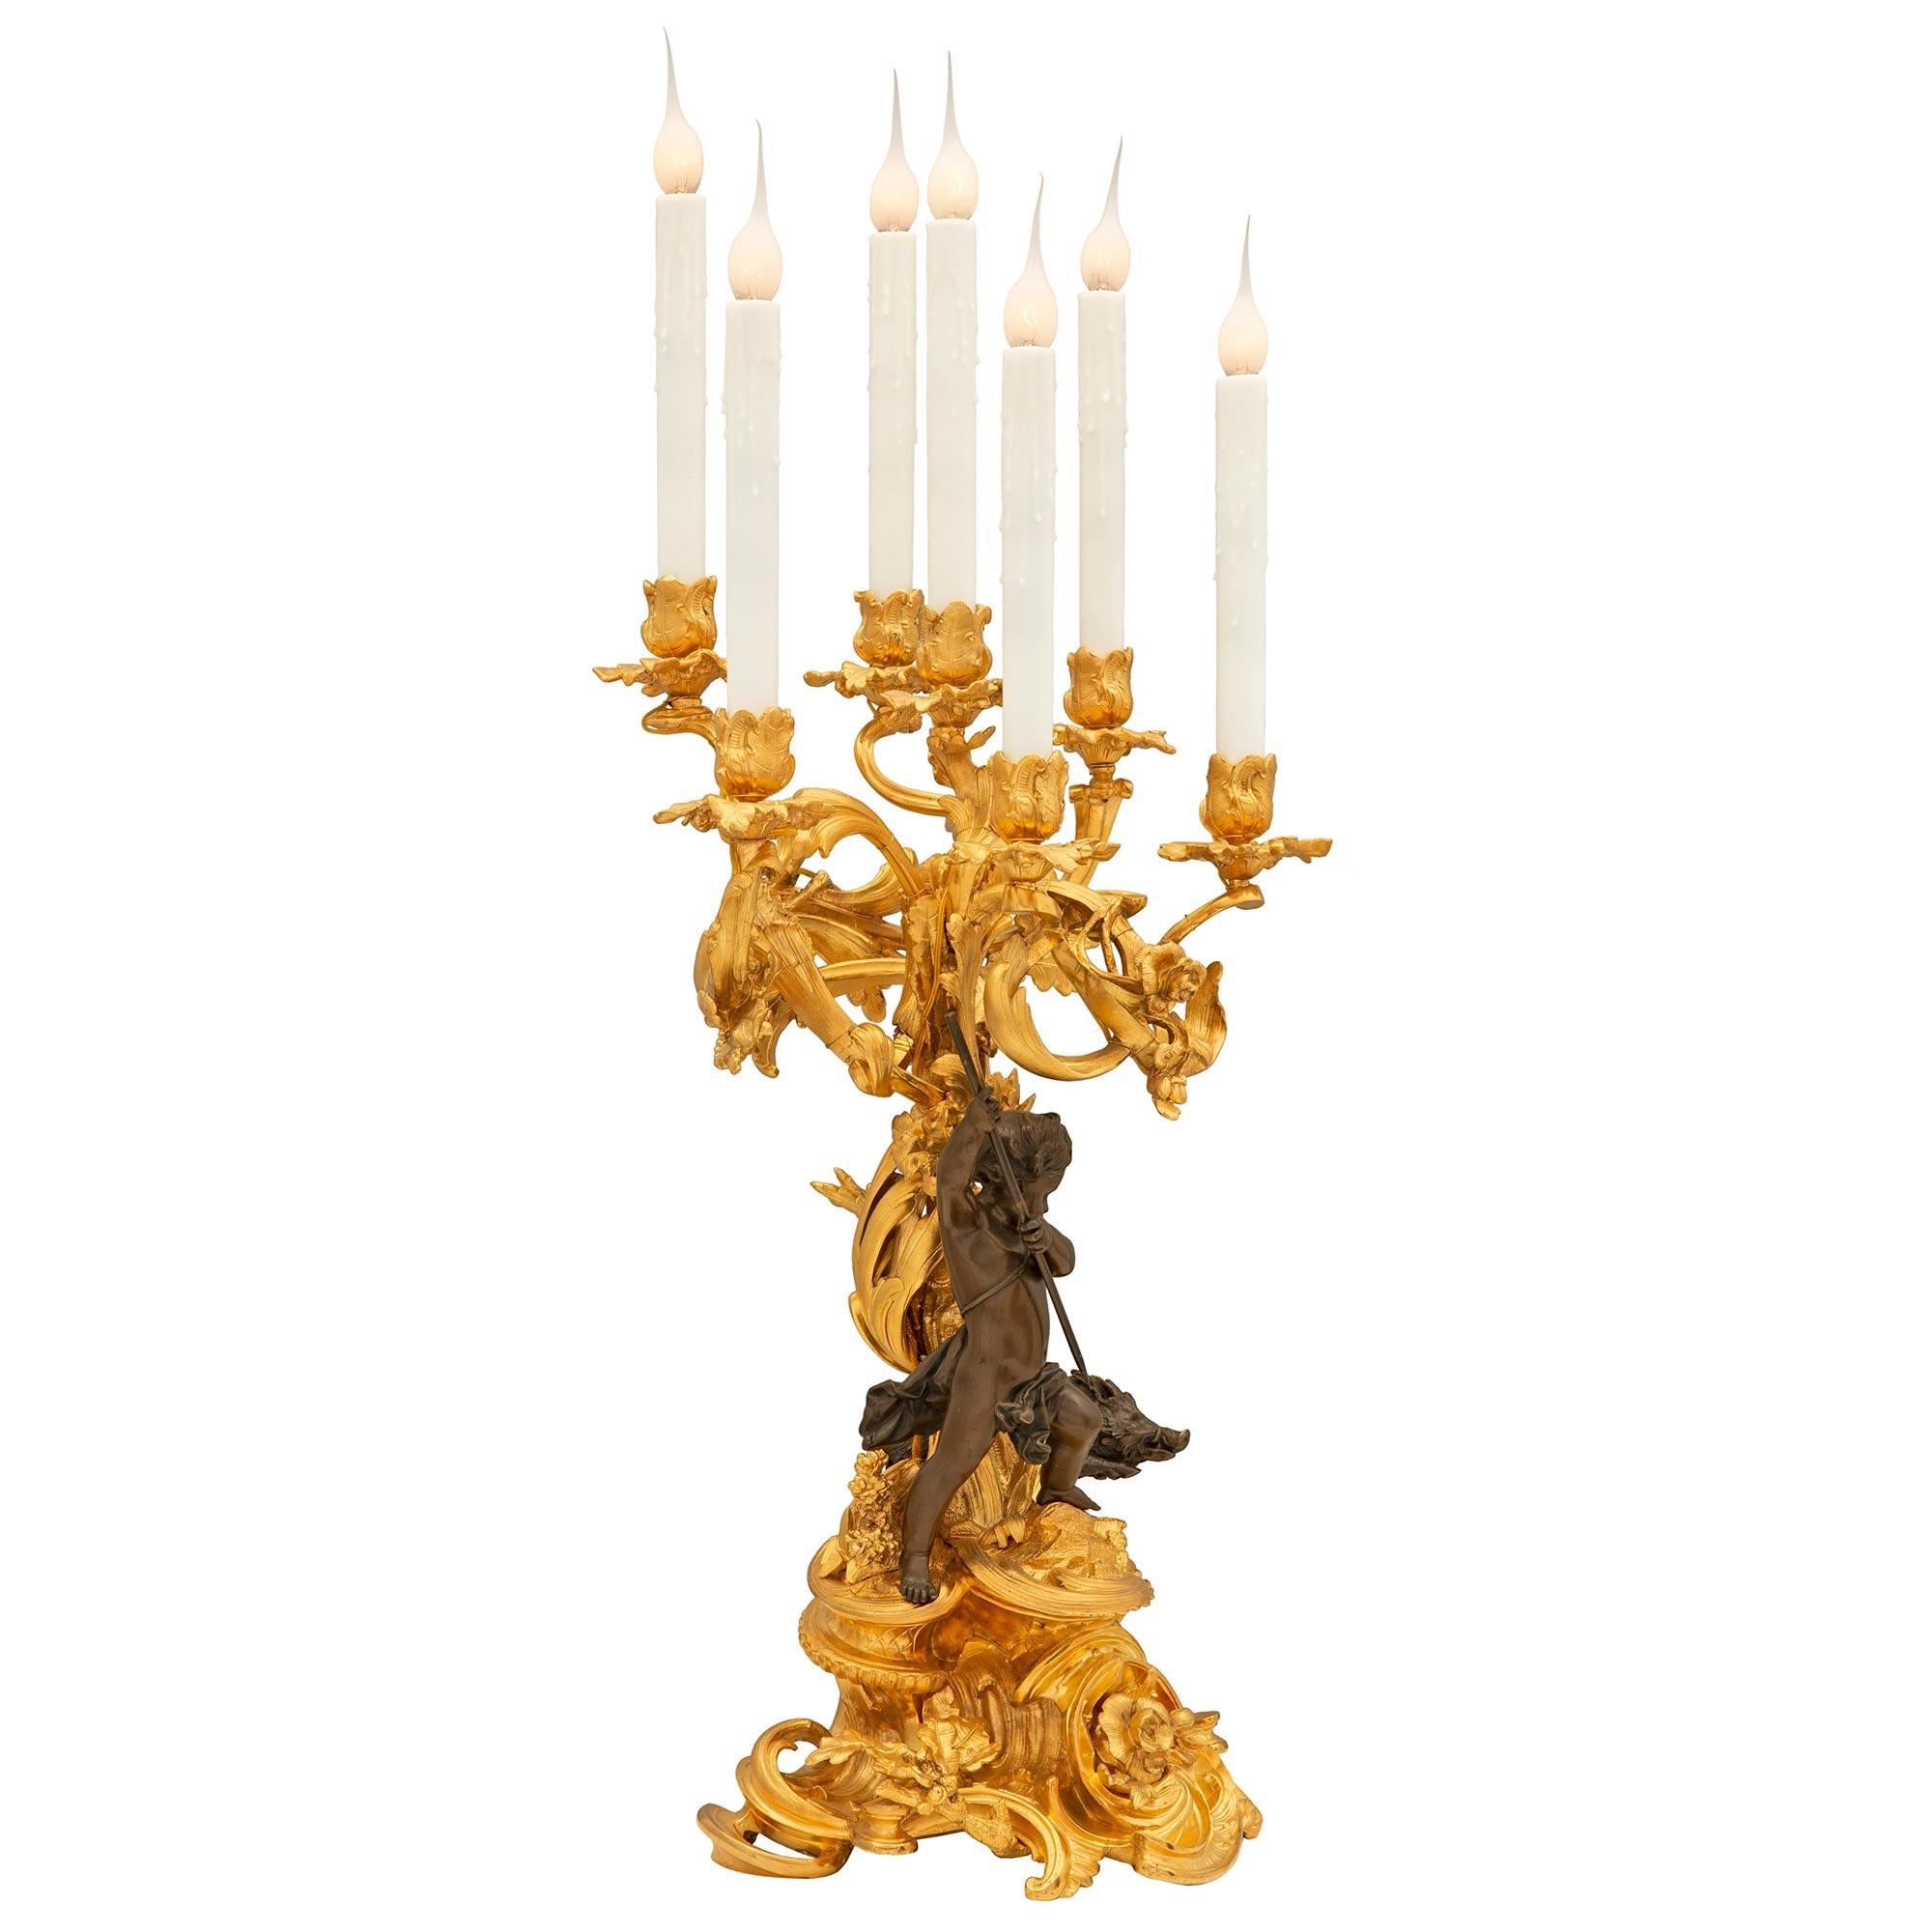 A stunning and monumentally scaled true pair of French 19th century Louis XV st. Belle Époque period ormolu and patinated bronze candelabra lamps. Each extremely high quality seven arm candelabra is raised by a striking and exceptionally well